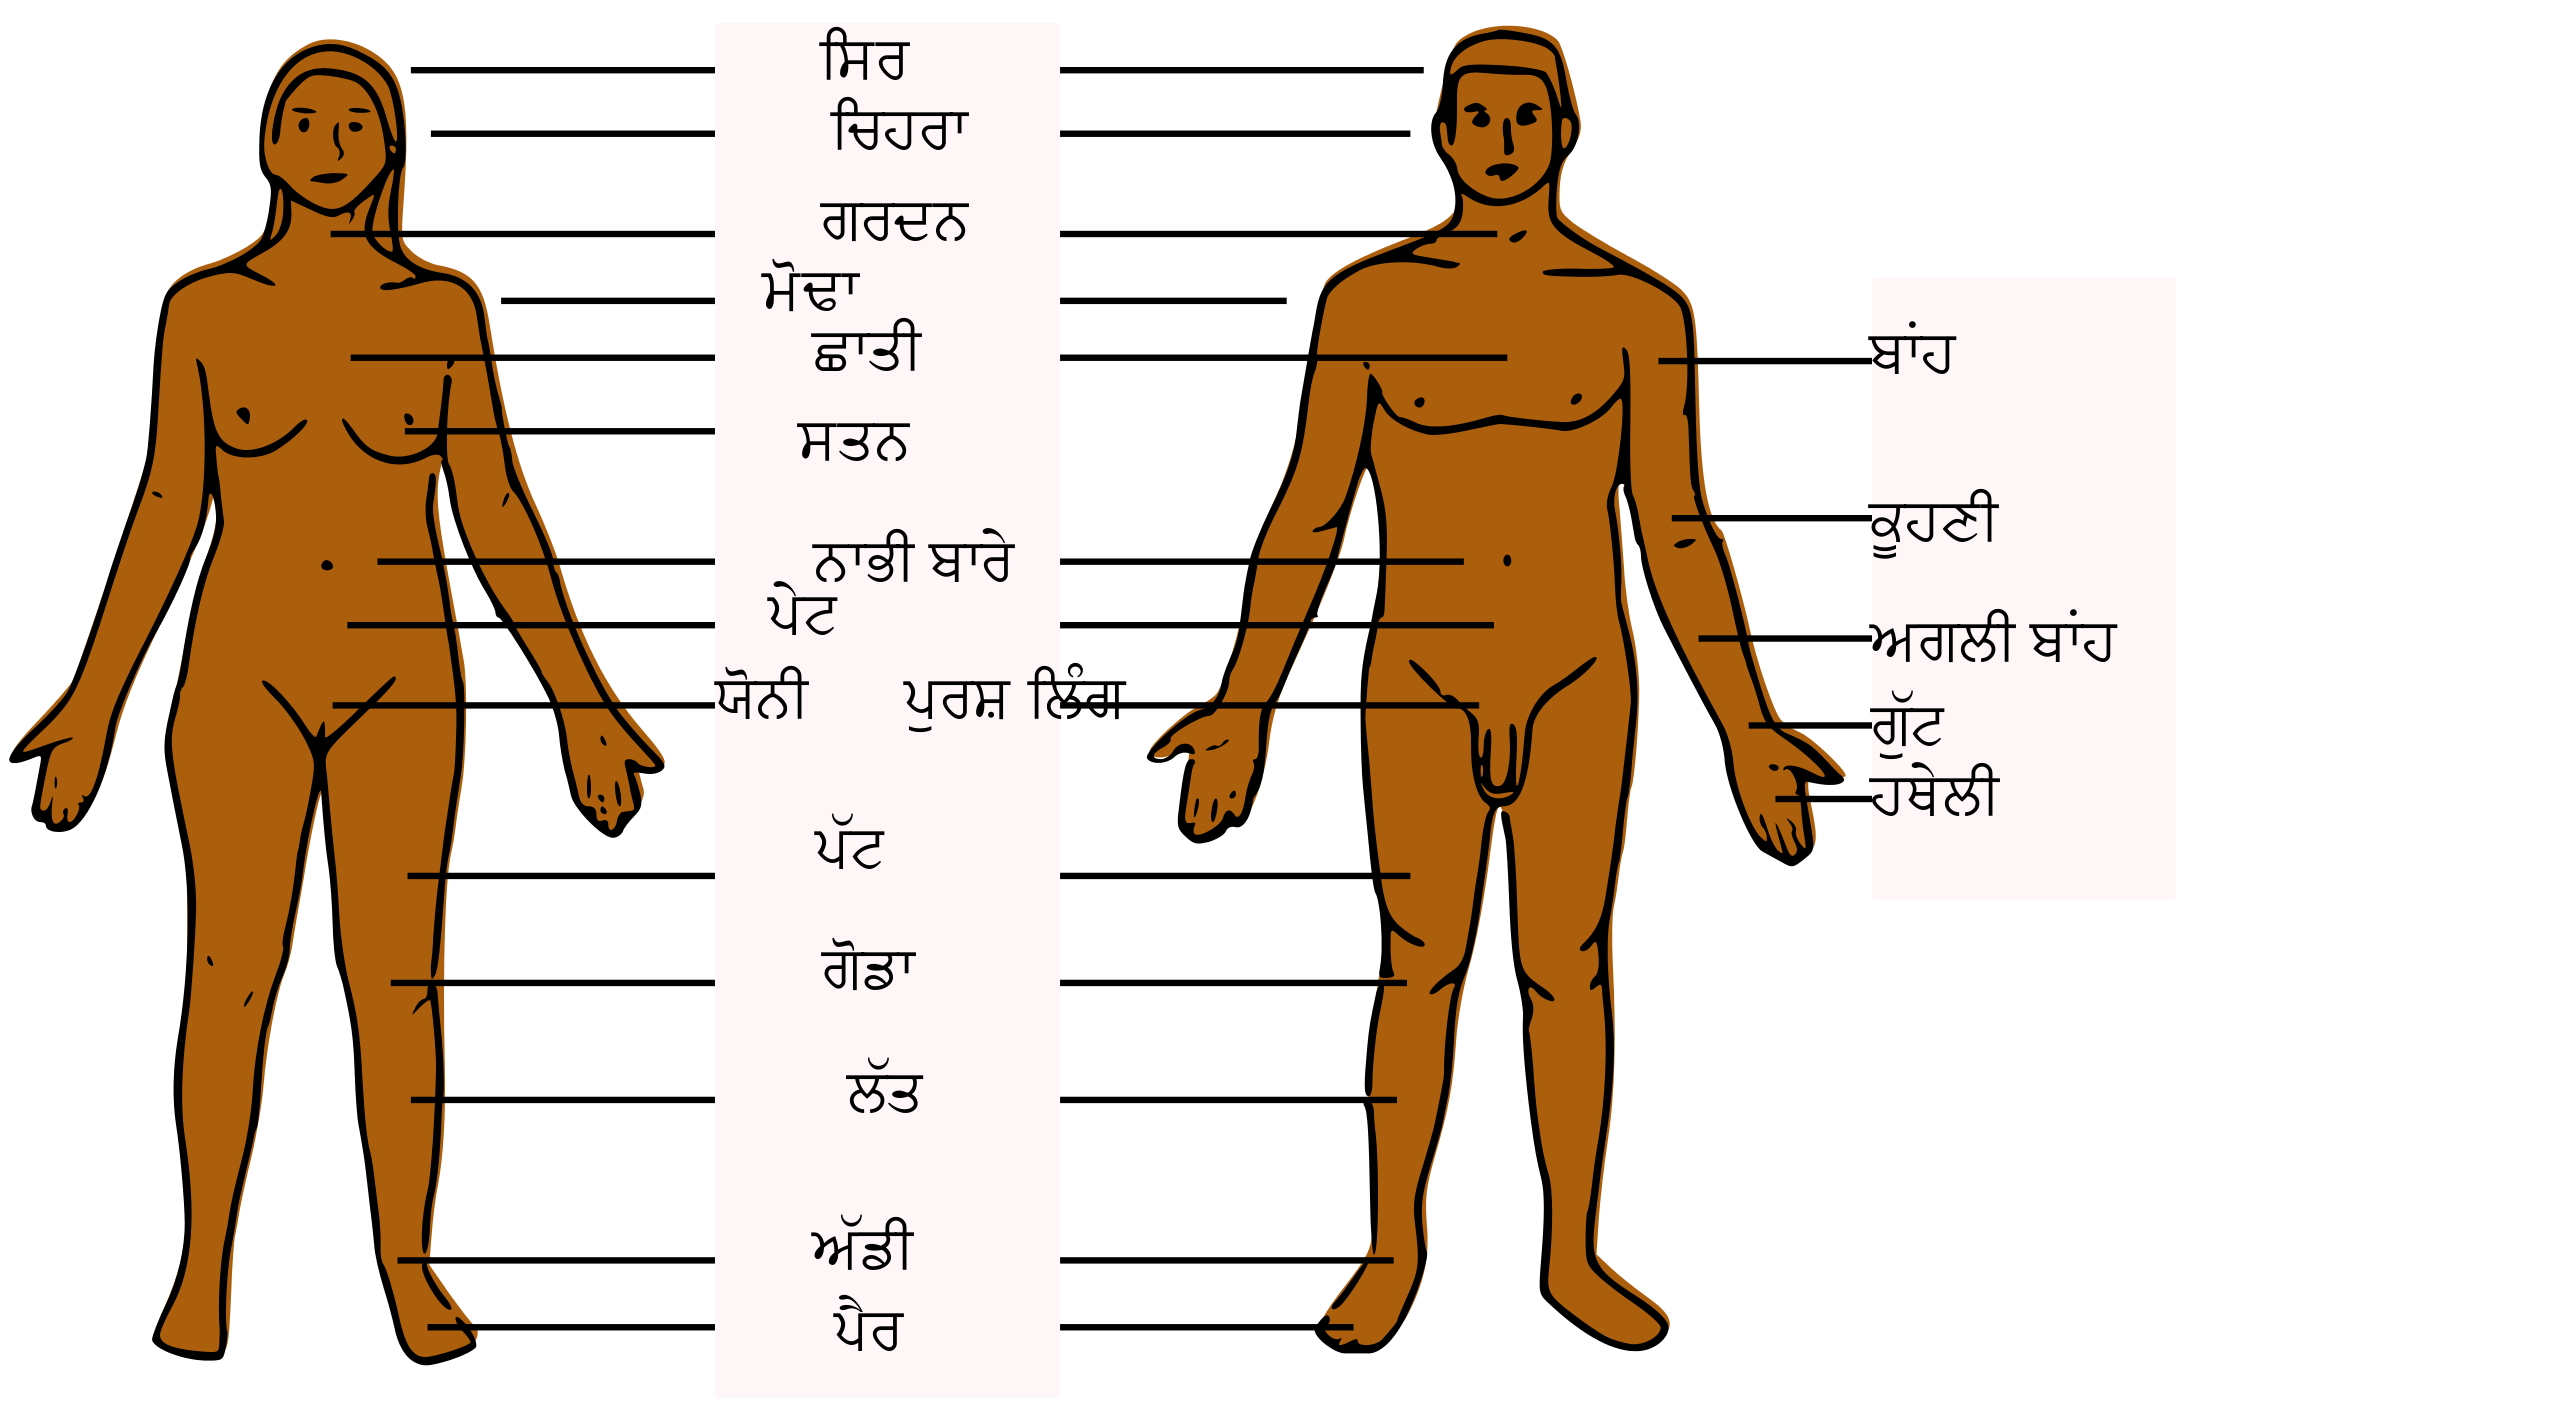 parts of the body pictures